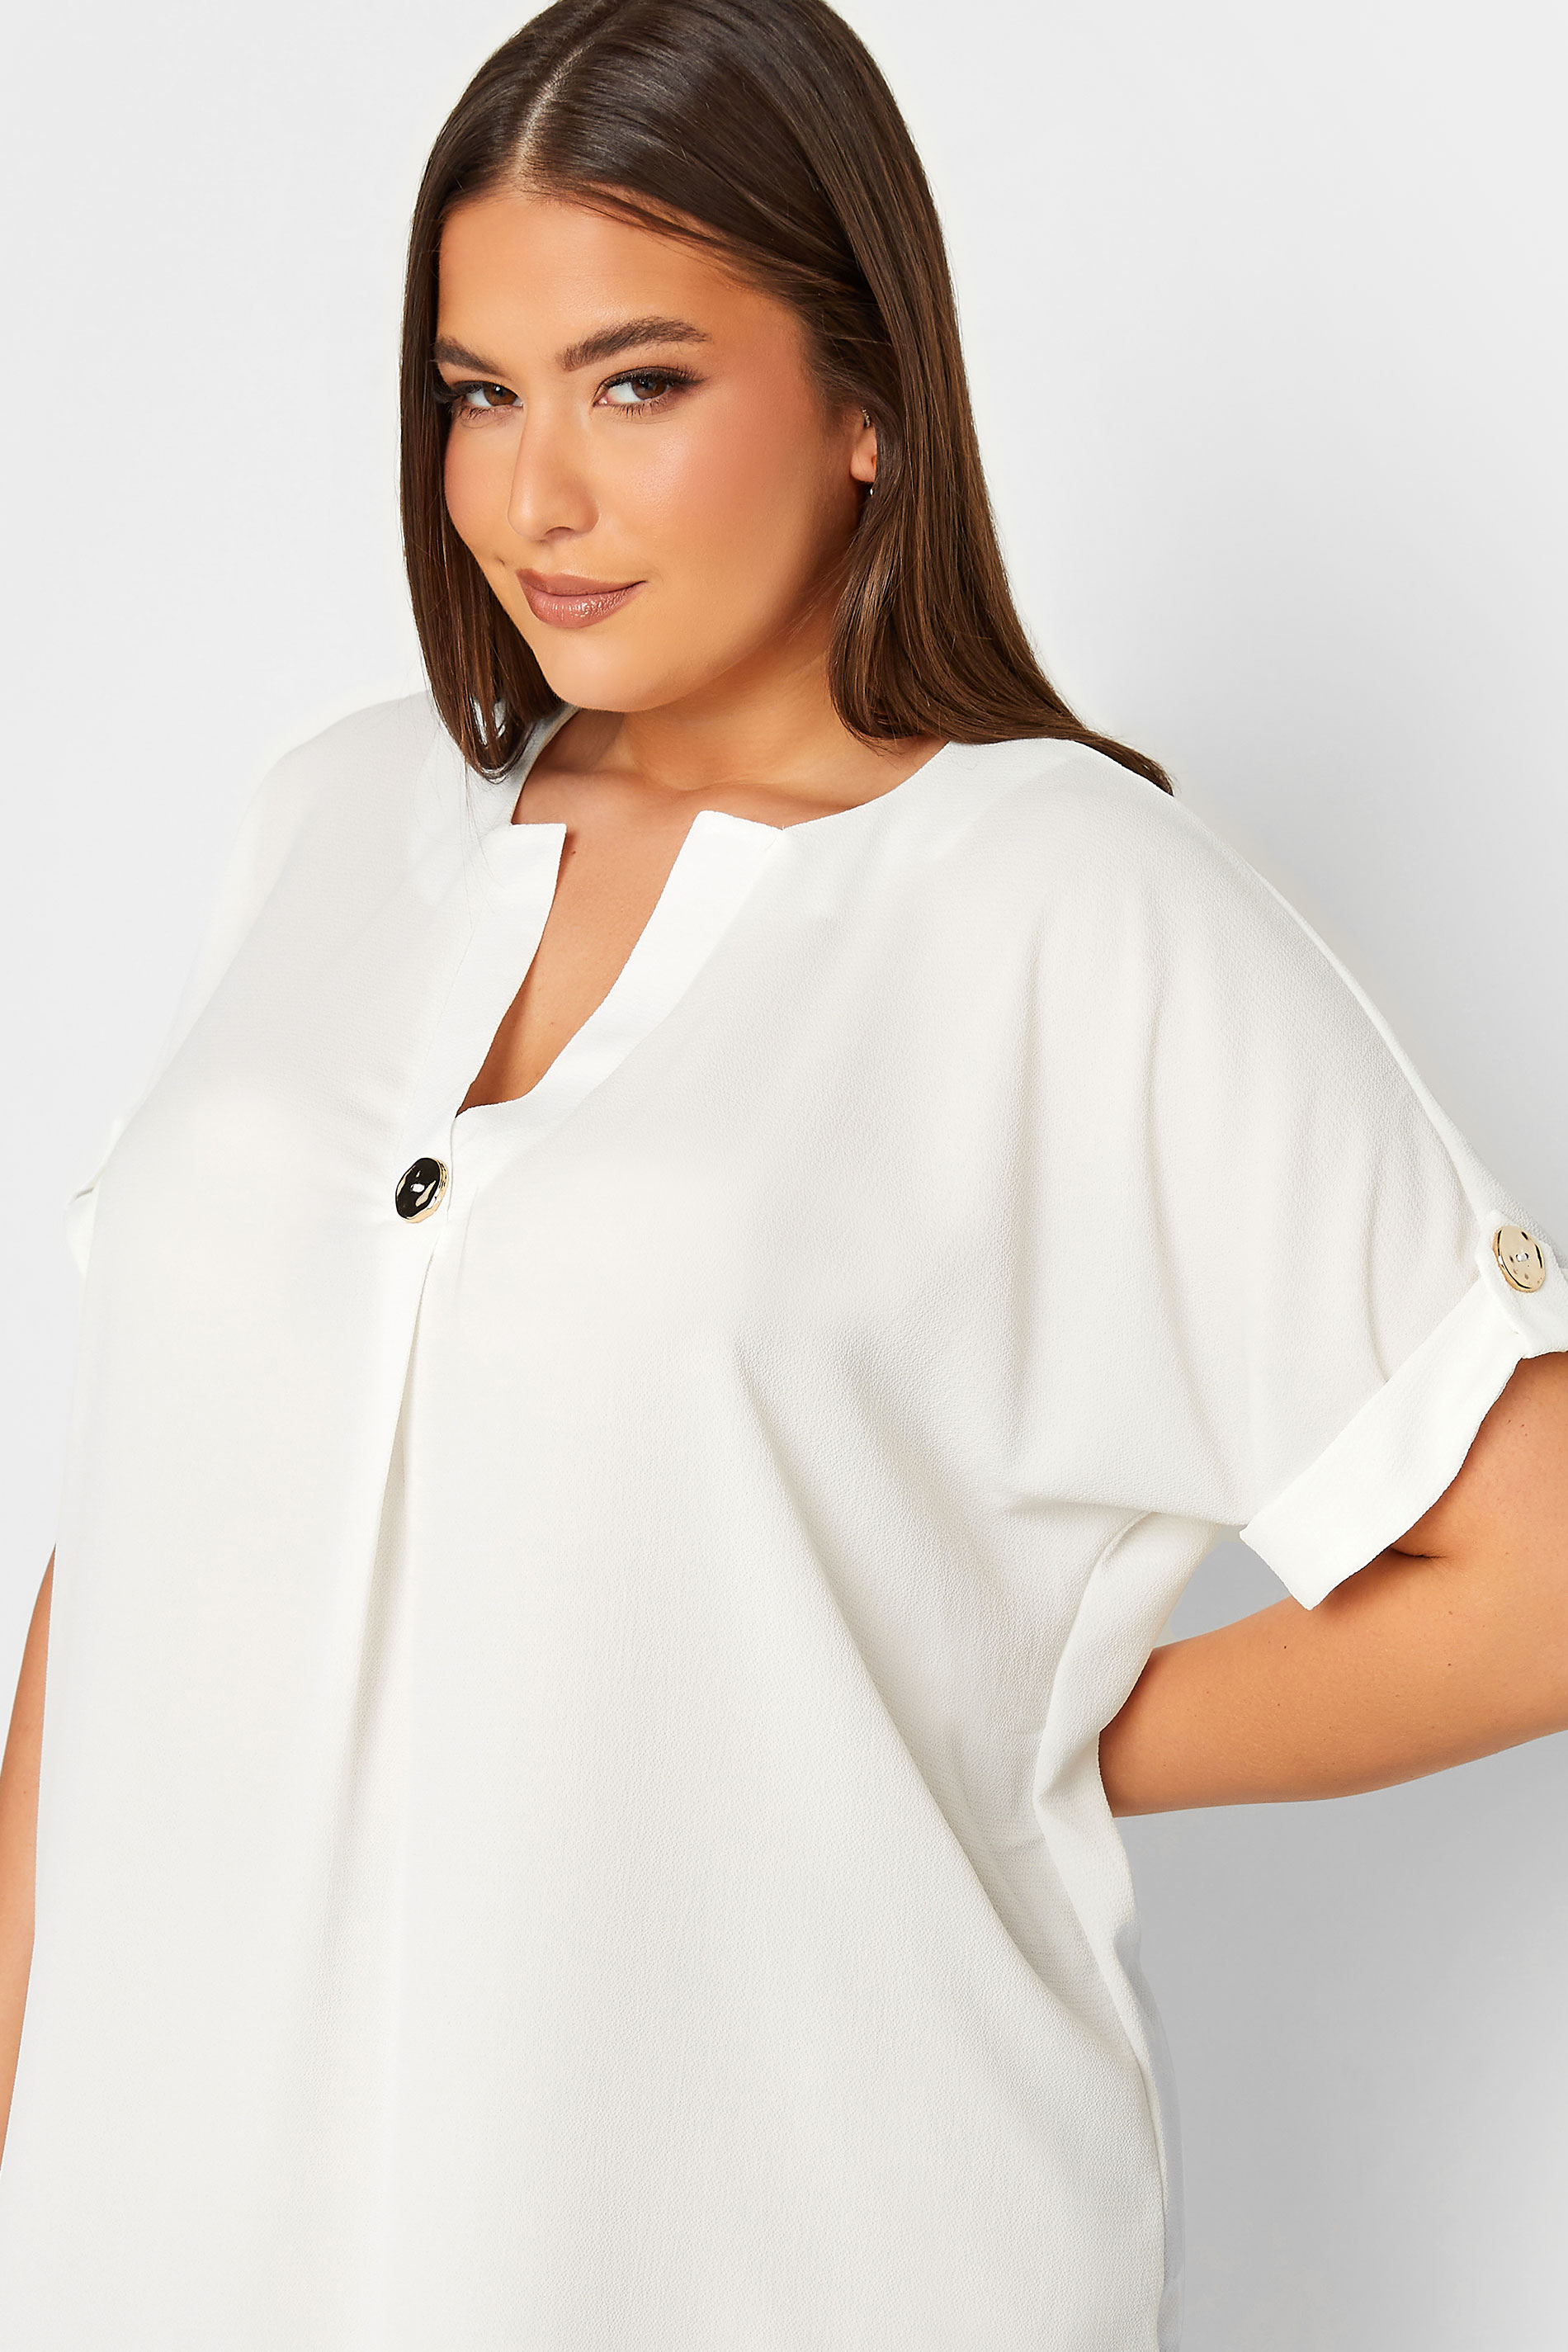 YOURS Curve Plus Size White Button Front Blouse | Yours Clothing